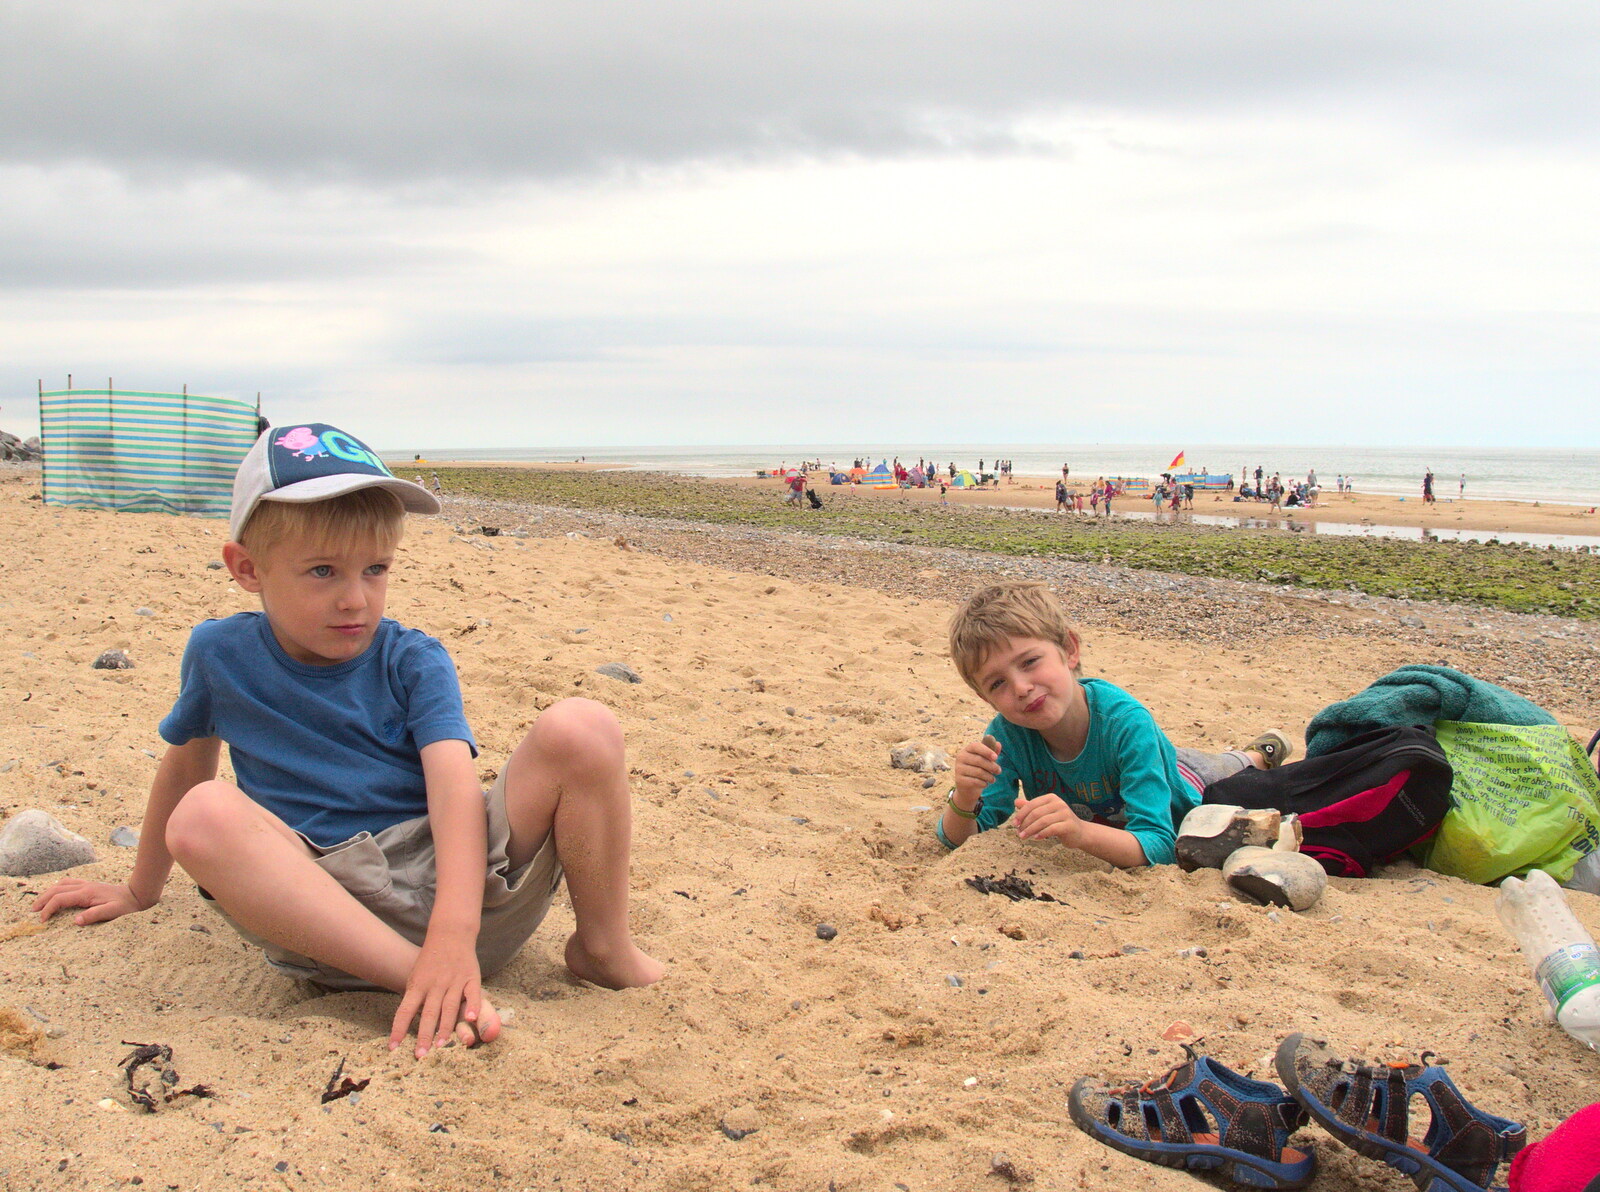 Harry and Fred on the sand from Camping in West Runton, North Norfolk - 30th July 2016